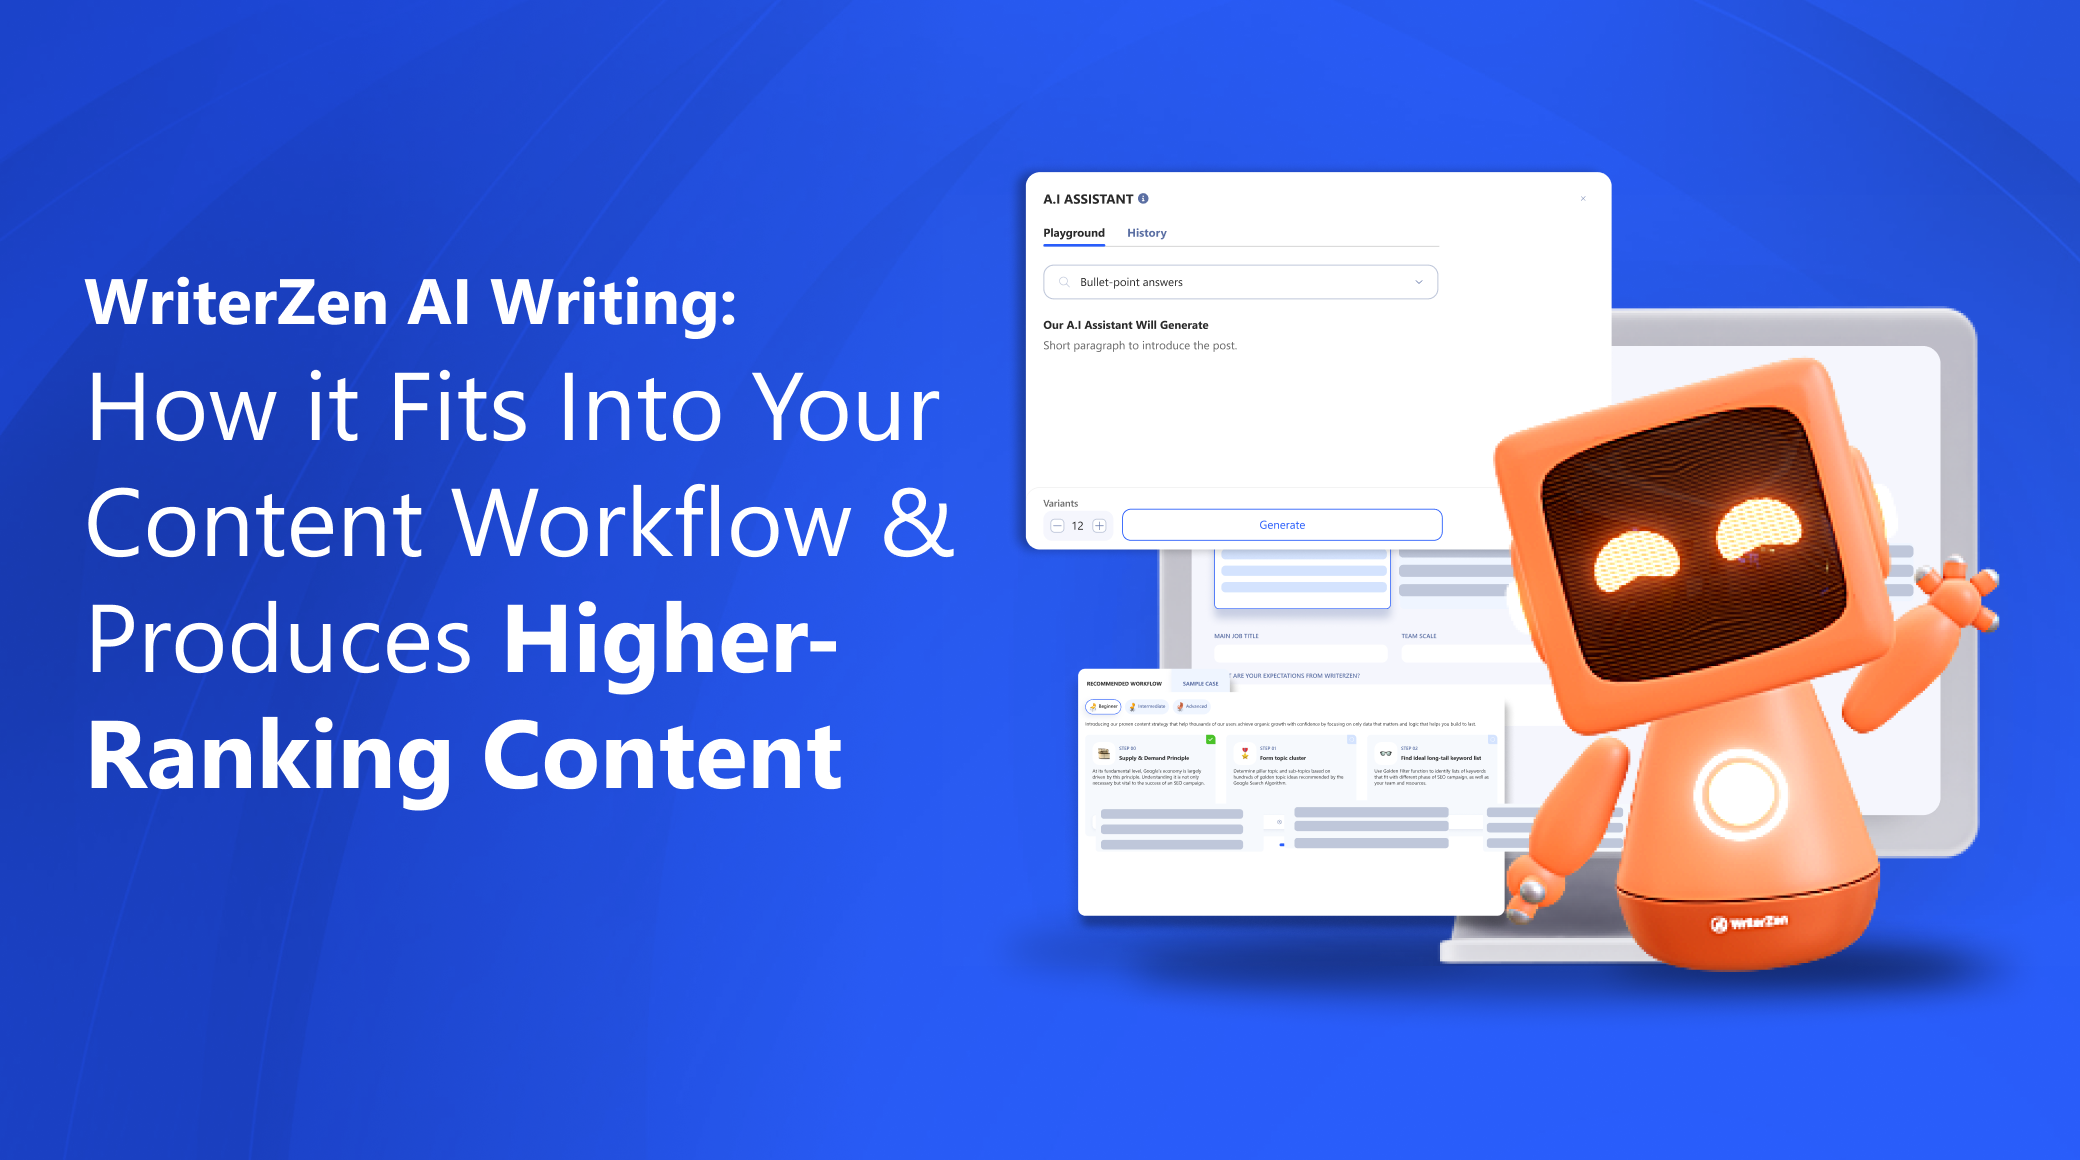 WriterZen AI Writing: How It Fits into Your Content Workflow & Produces Higher-Ranking Content